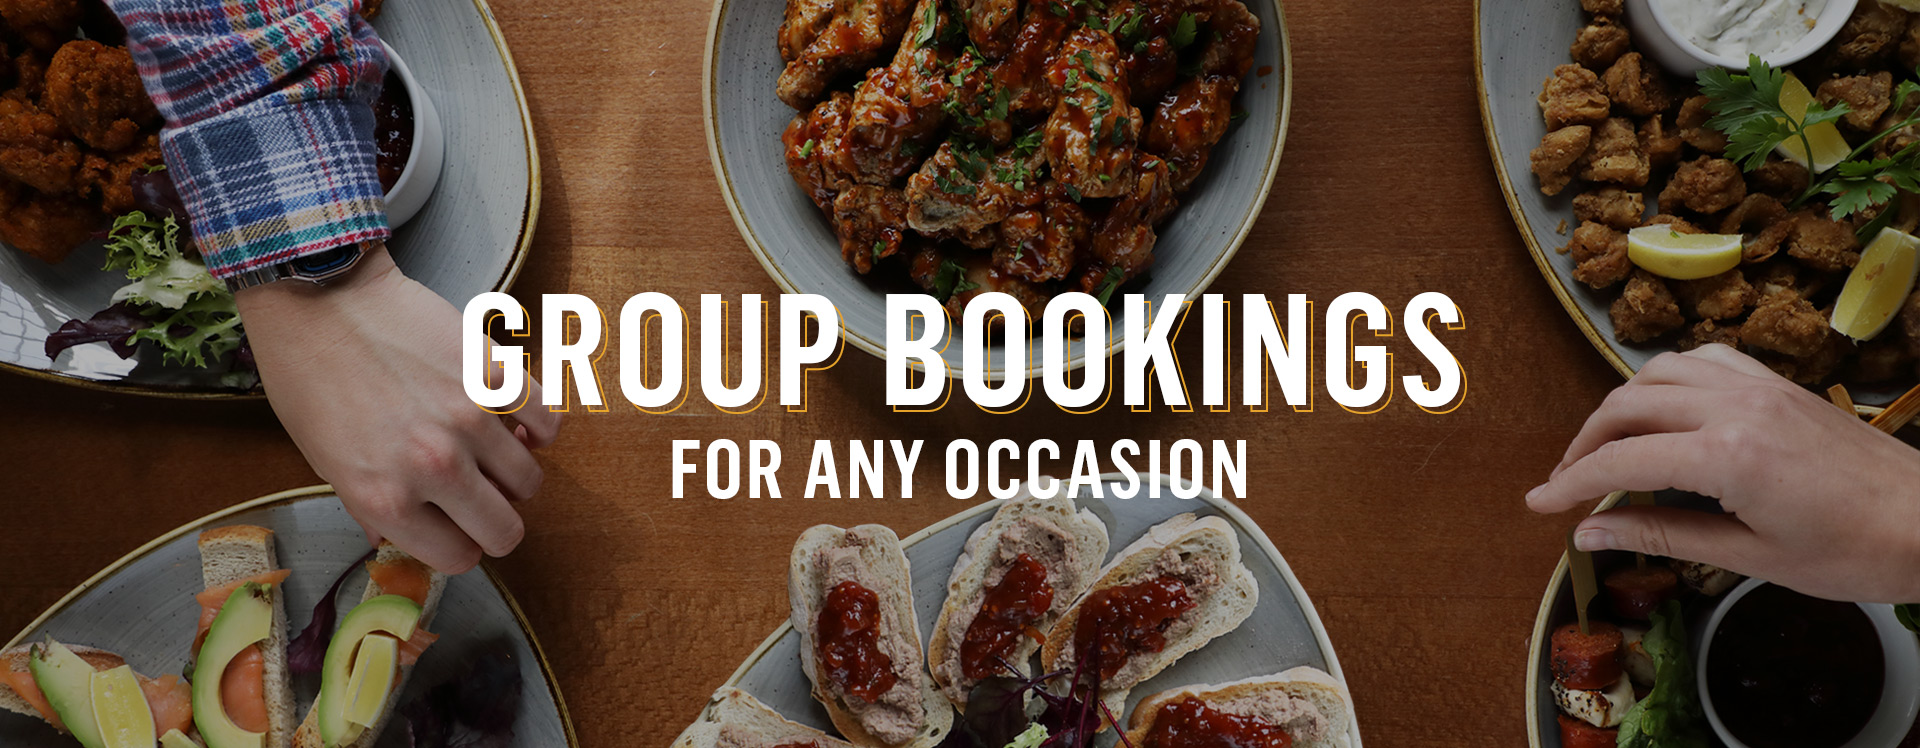 Group Bookings at The Railway Tavern